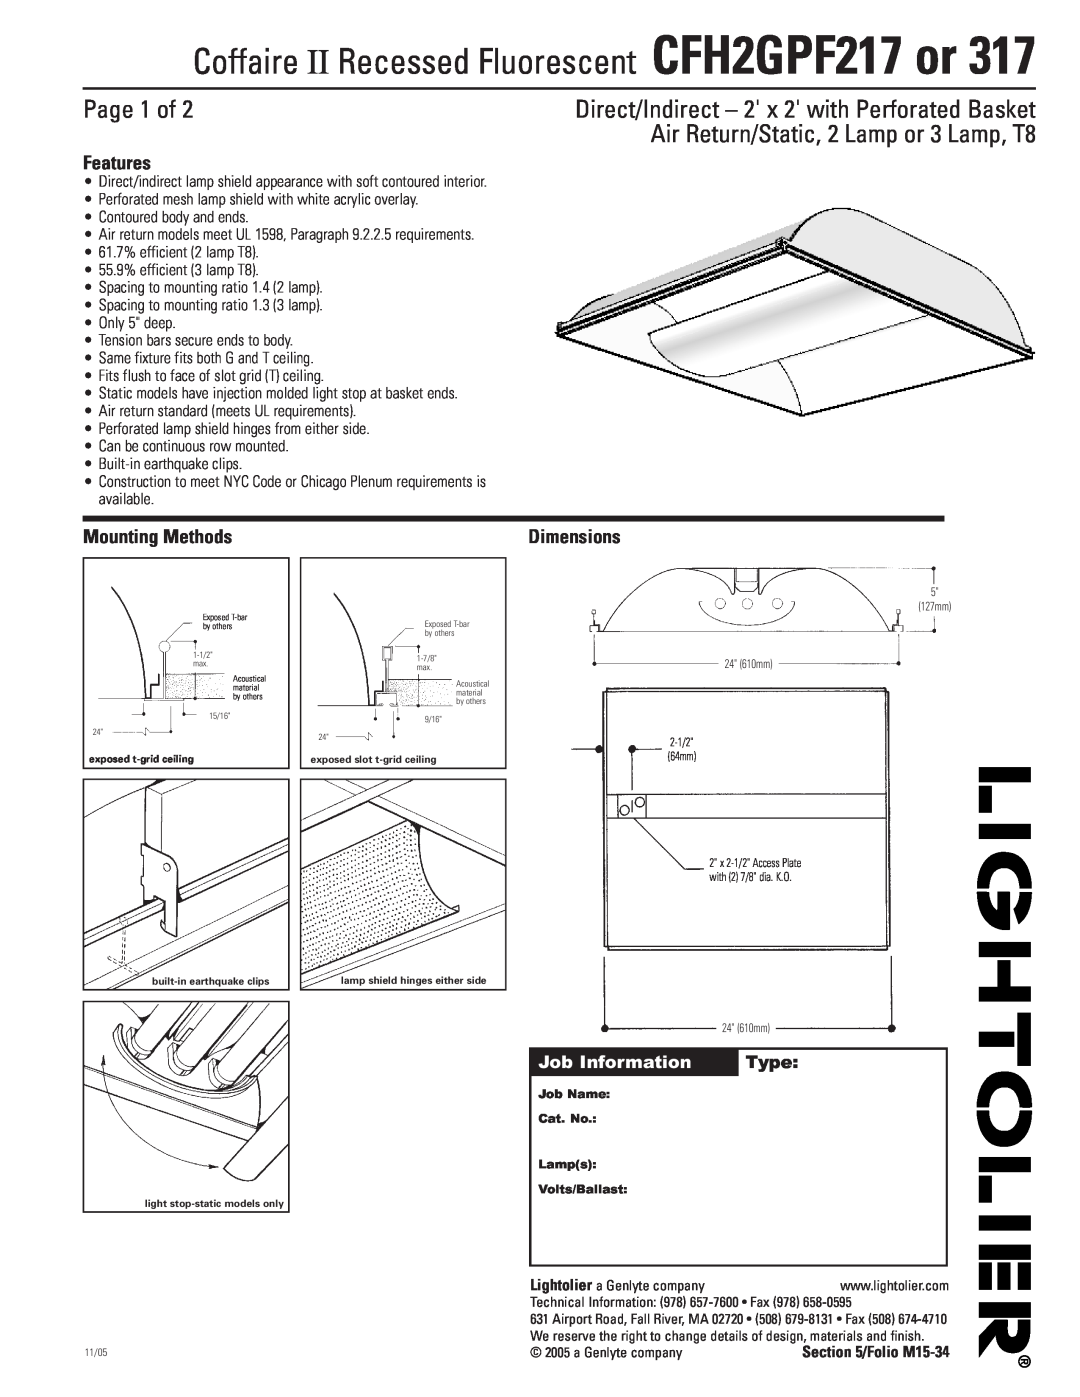 Lightolier CFH2GPF217 or 317 dimensions Coffaire II Recessed Fluorescent CFH2GPF217 or, Page 1 of, Features, Type 